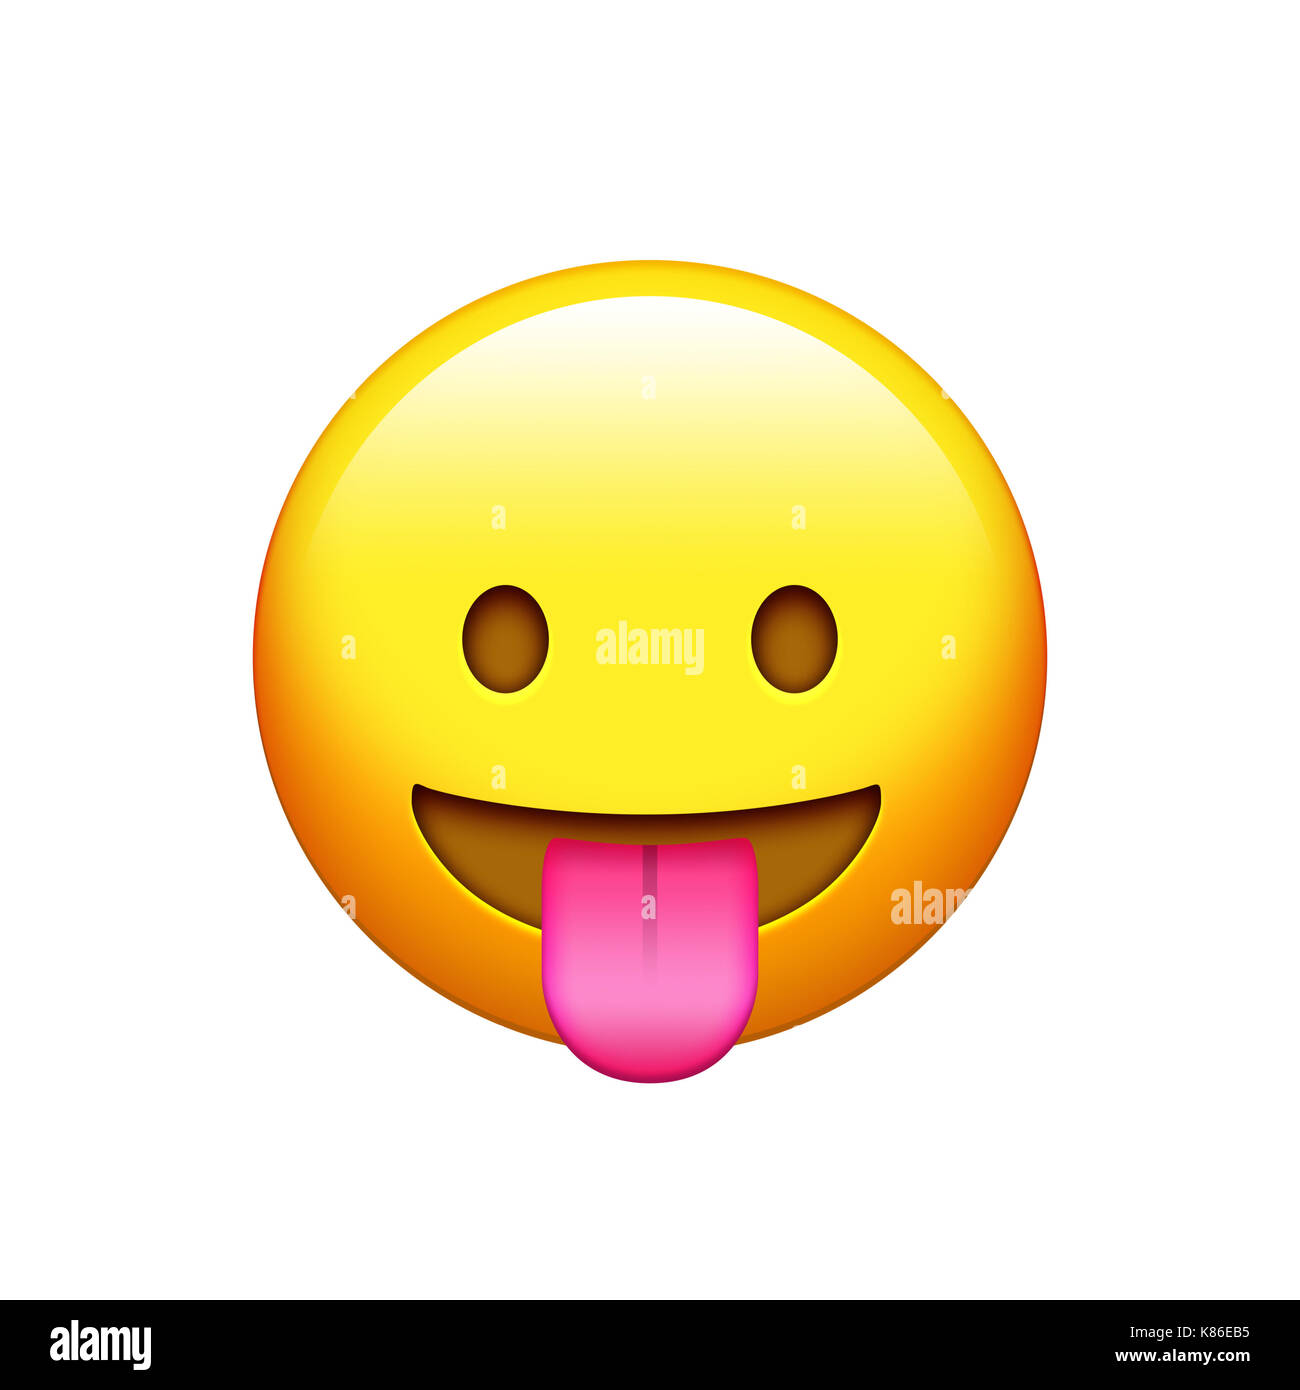 The isolated yellow smiley face with tongue out icon Stock Photo